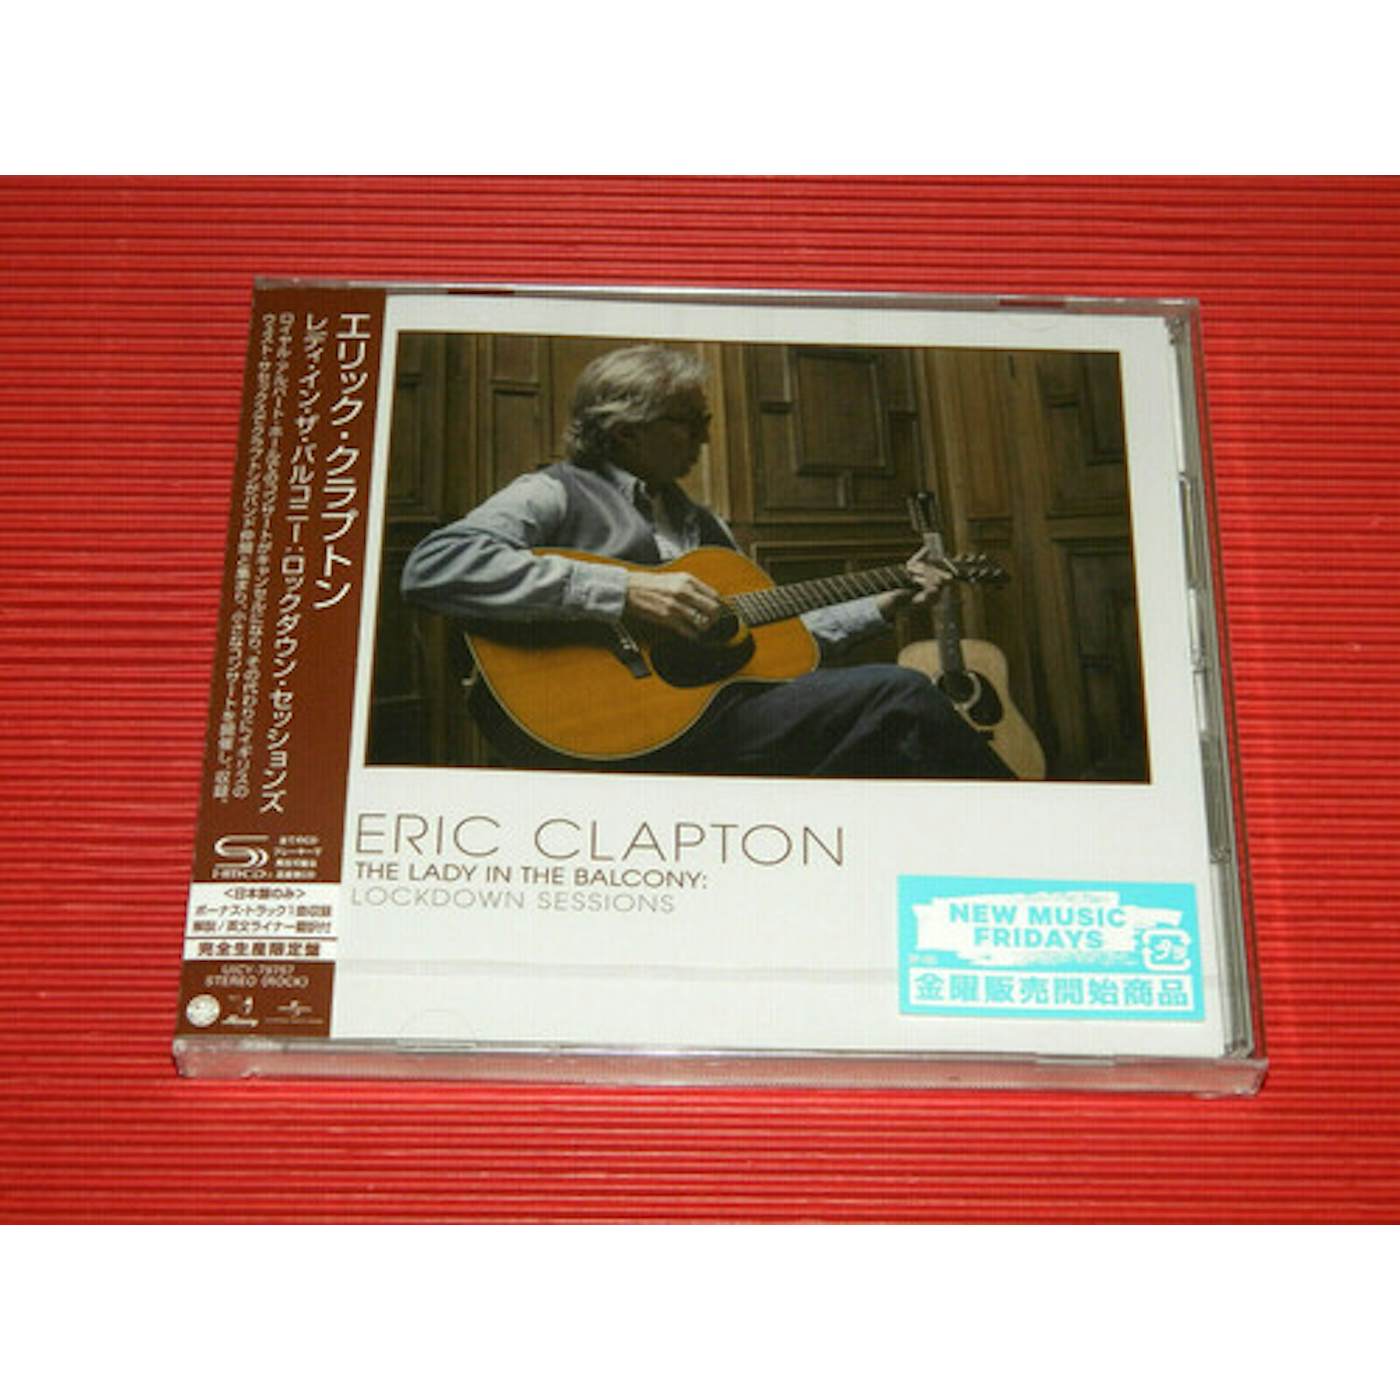 Eric Clapton LADY IN THE BALCONY: LOCKDOWN SESSIONS CD